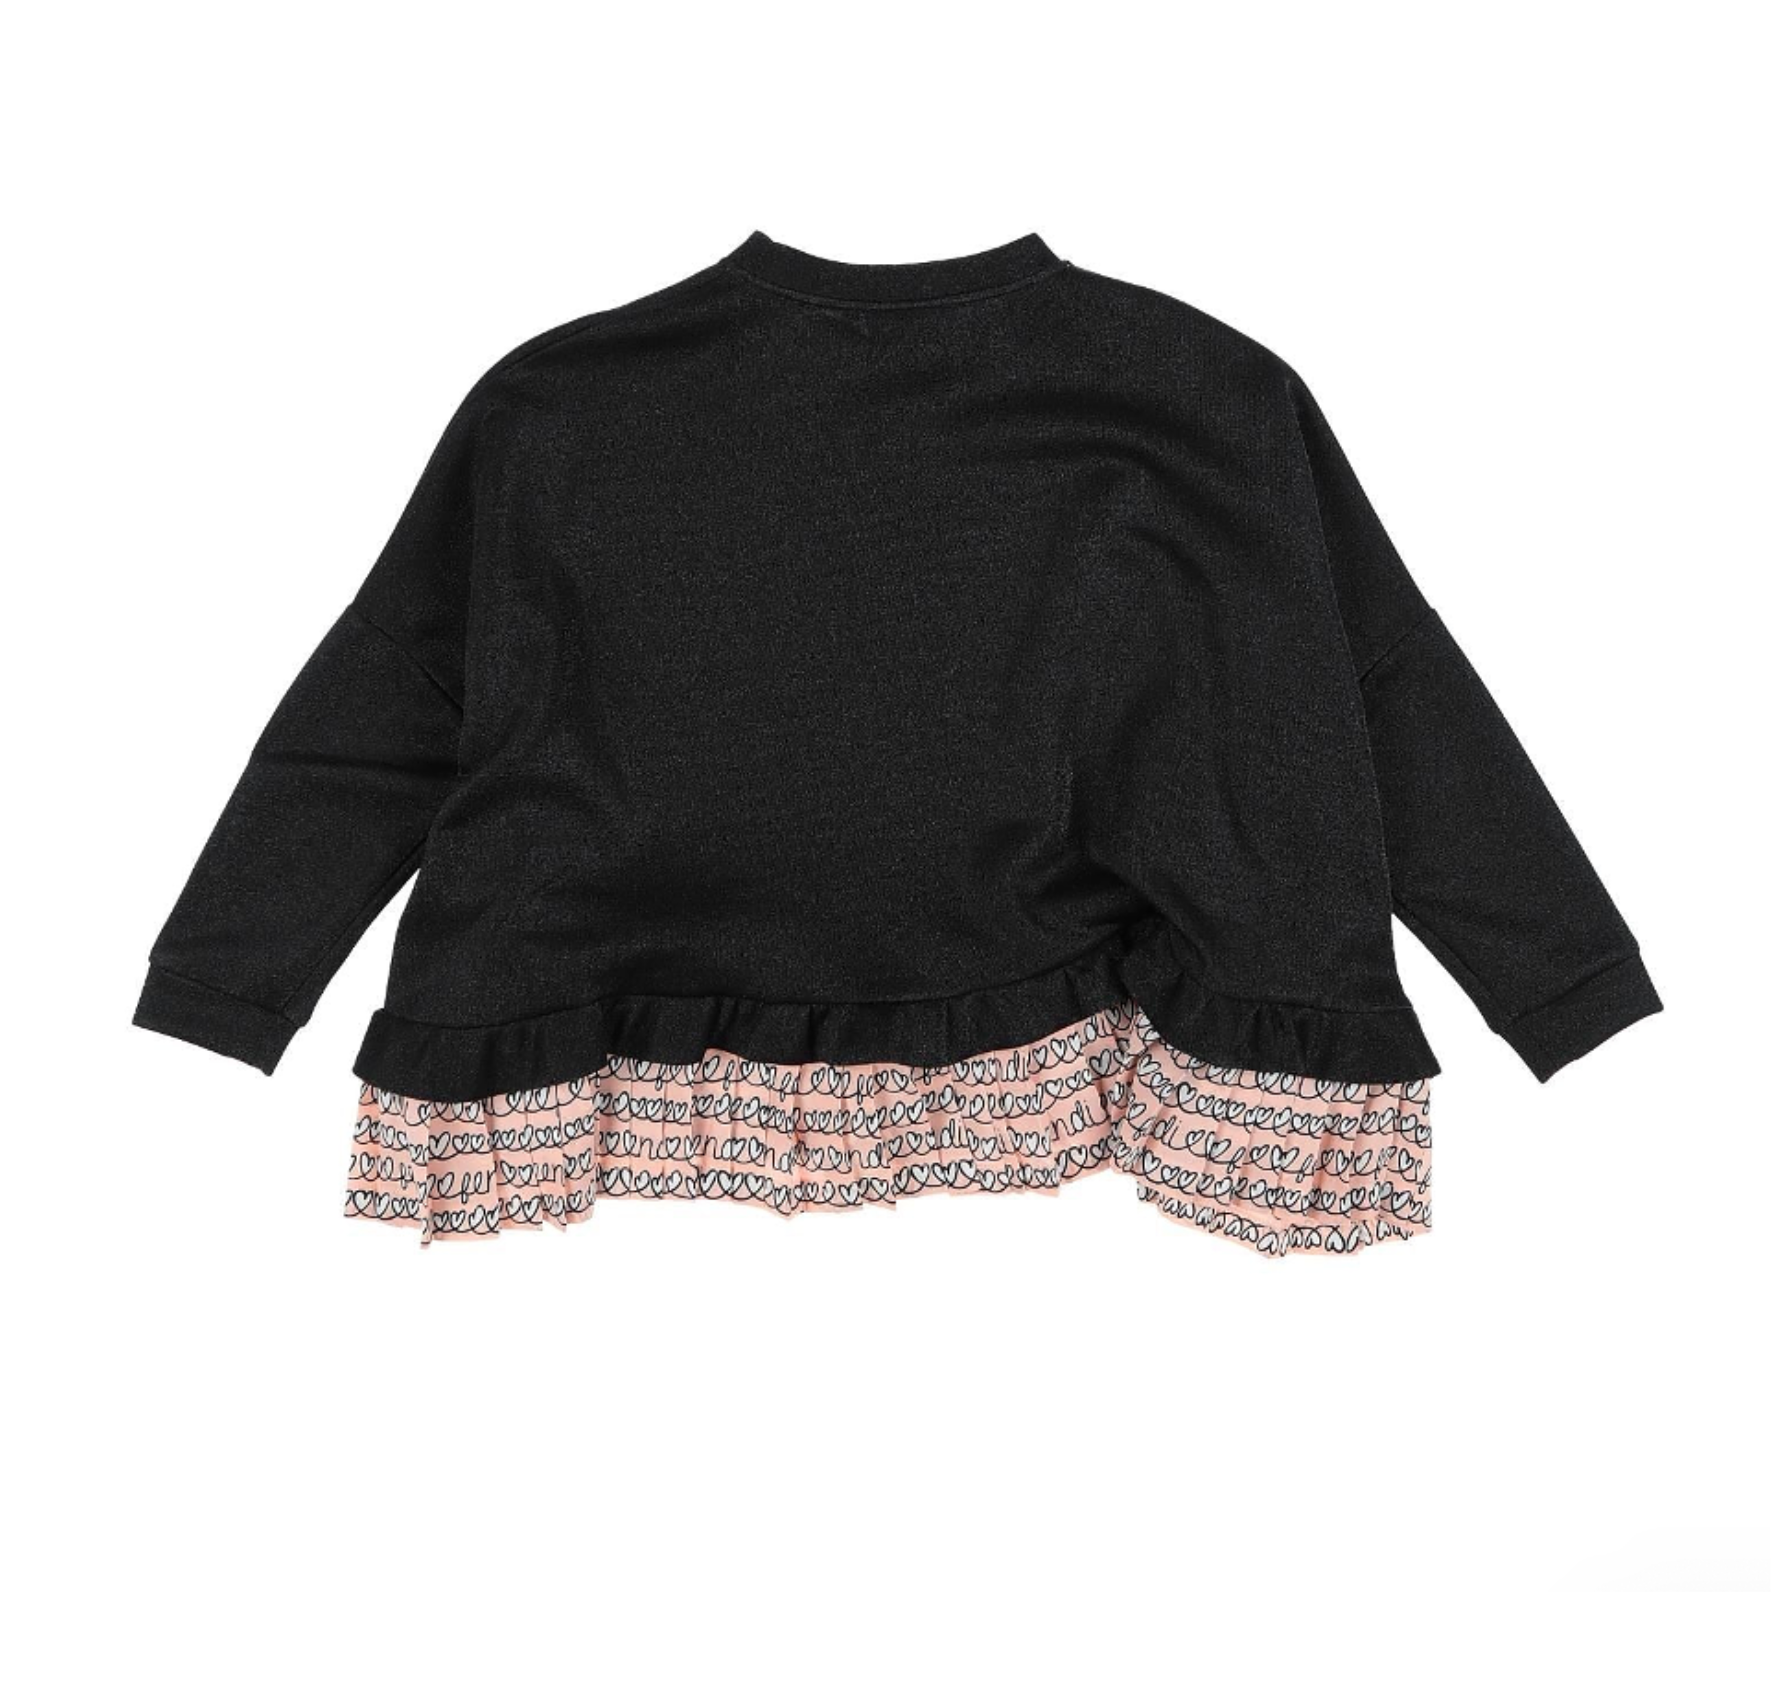 FENDI - Black and pink sweater with hearts - 5 years old